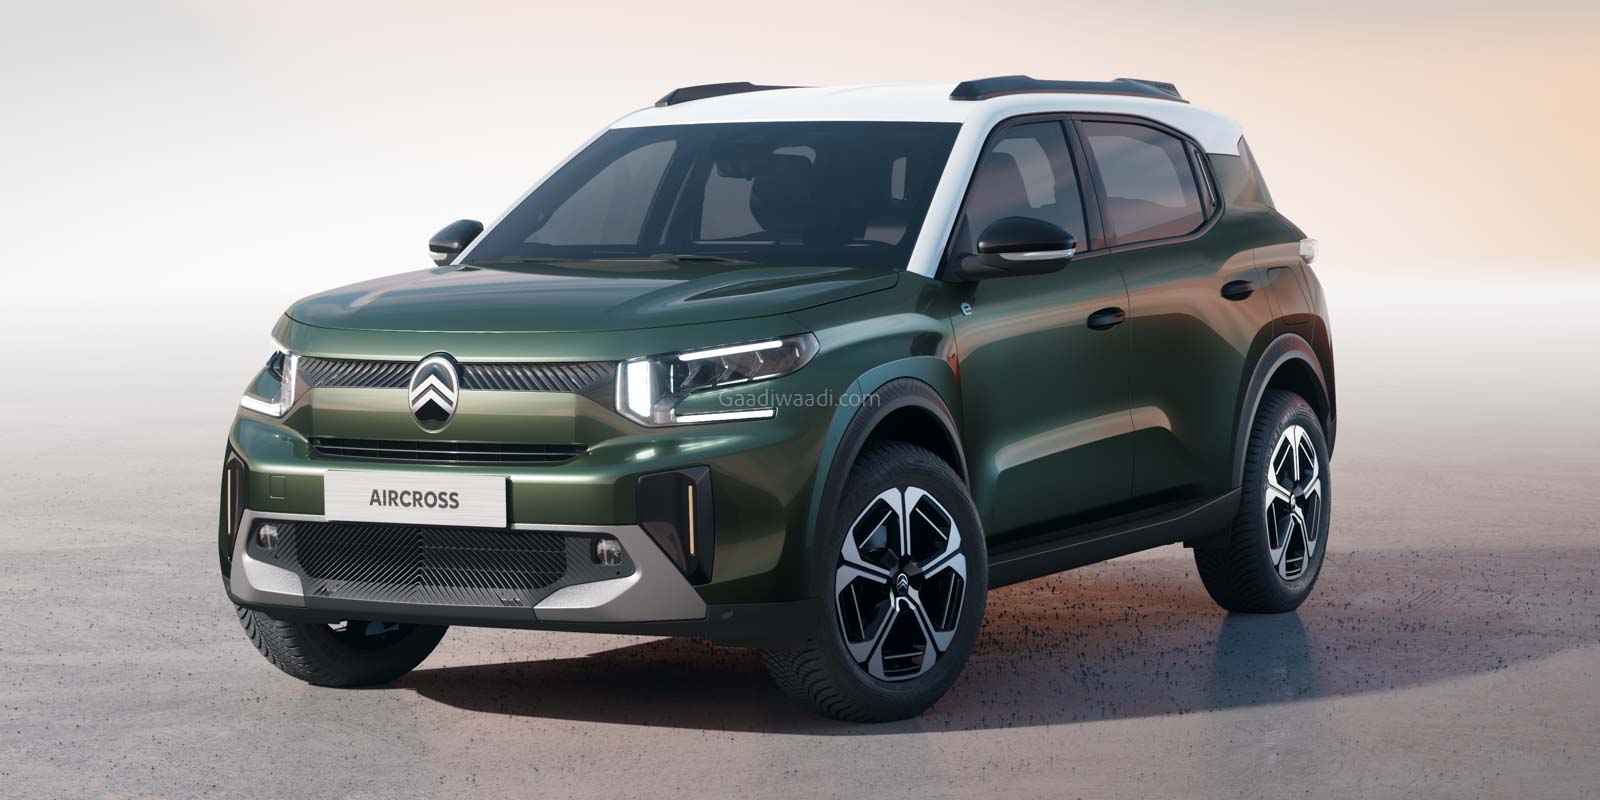 Citroen eC3 Aircross Unveiled With Brand New Styling, India Bound? - GaadiWaadi.com